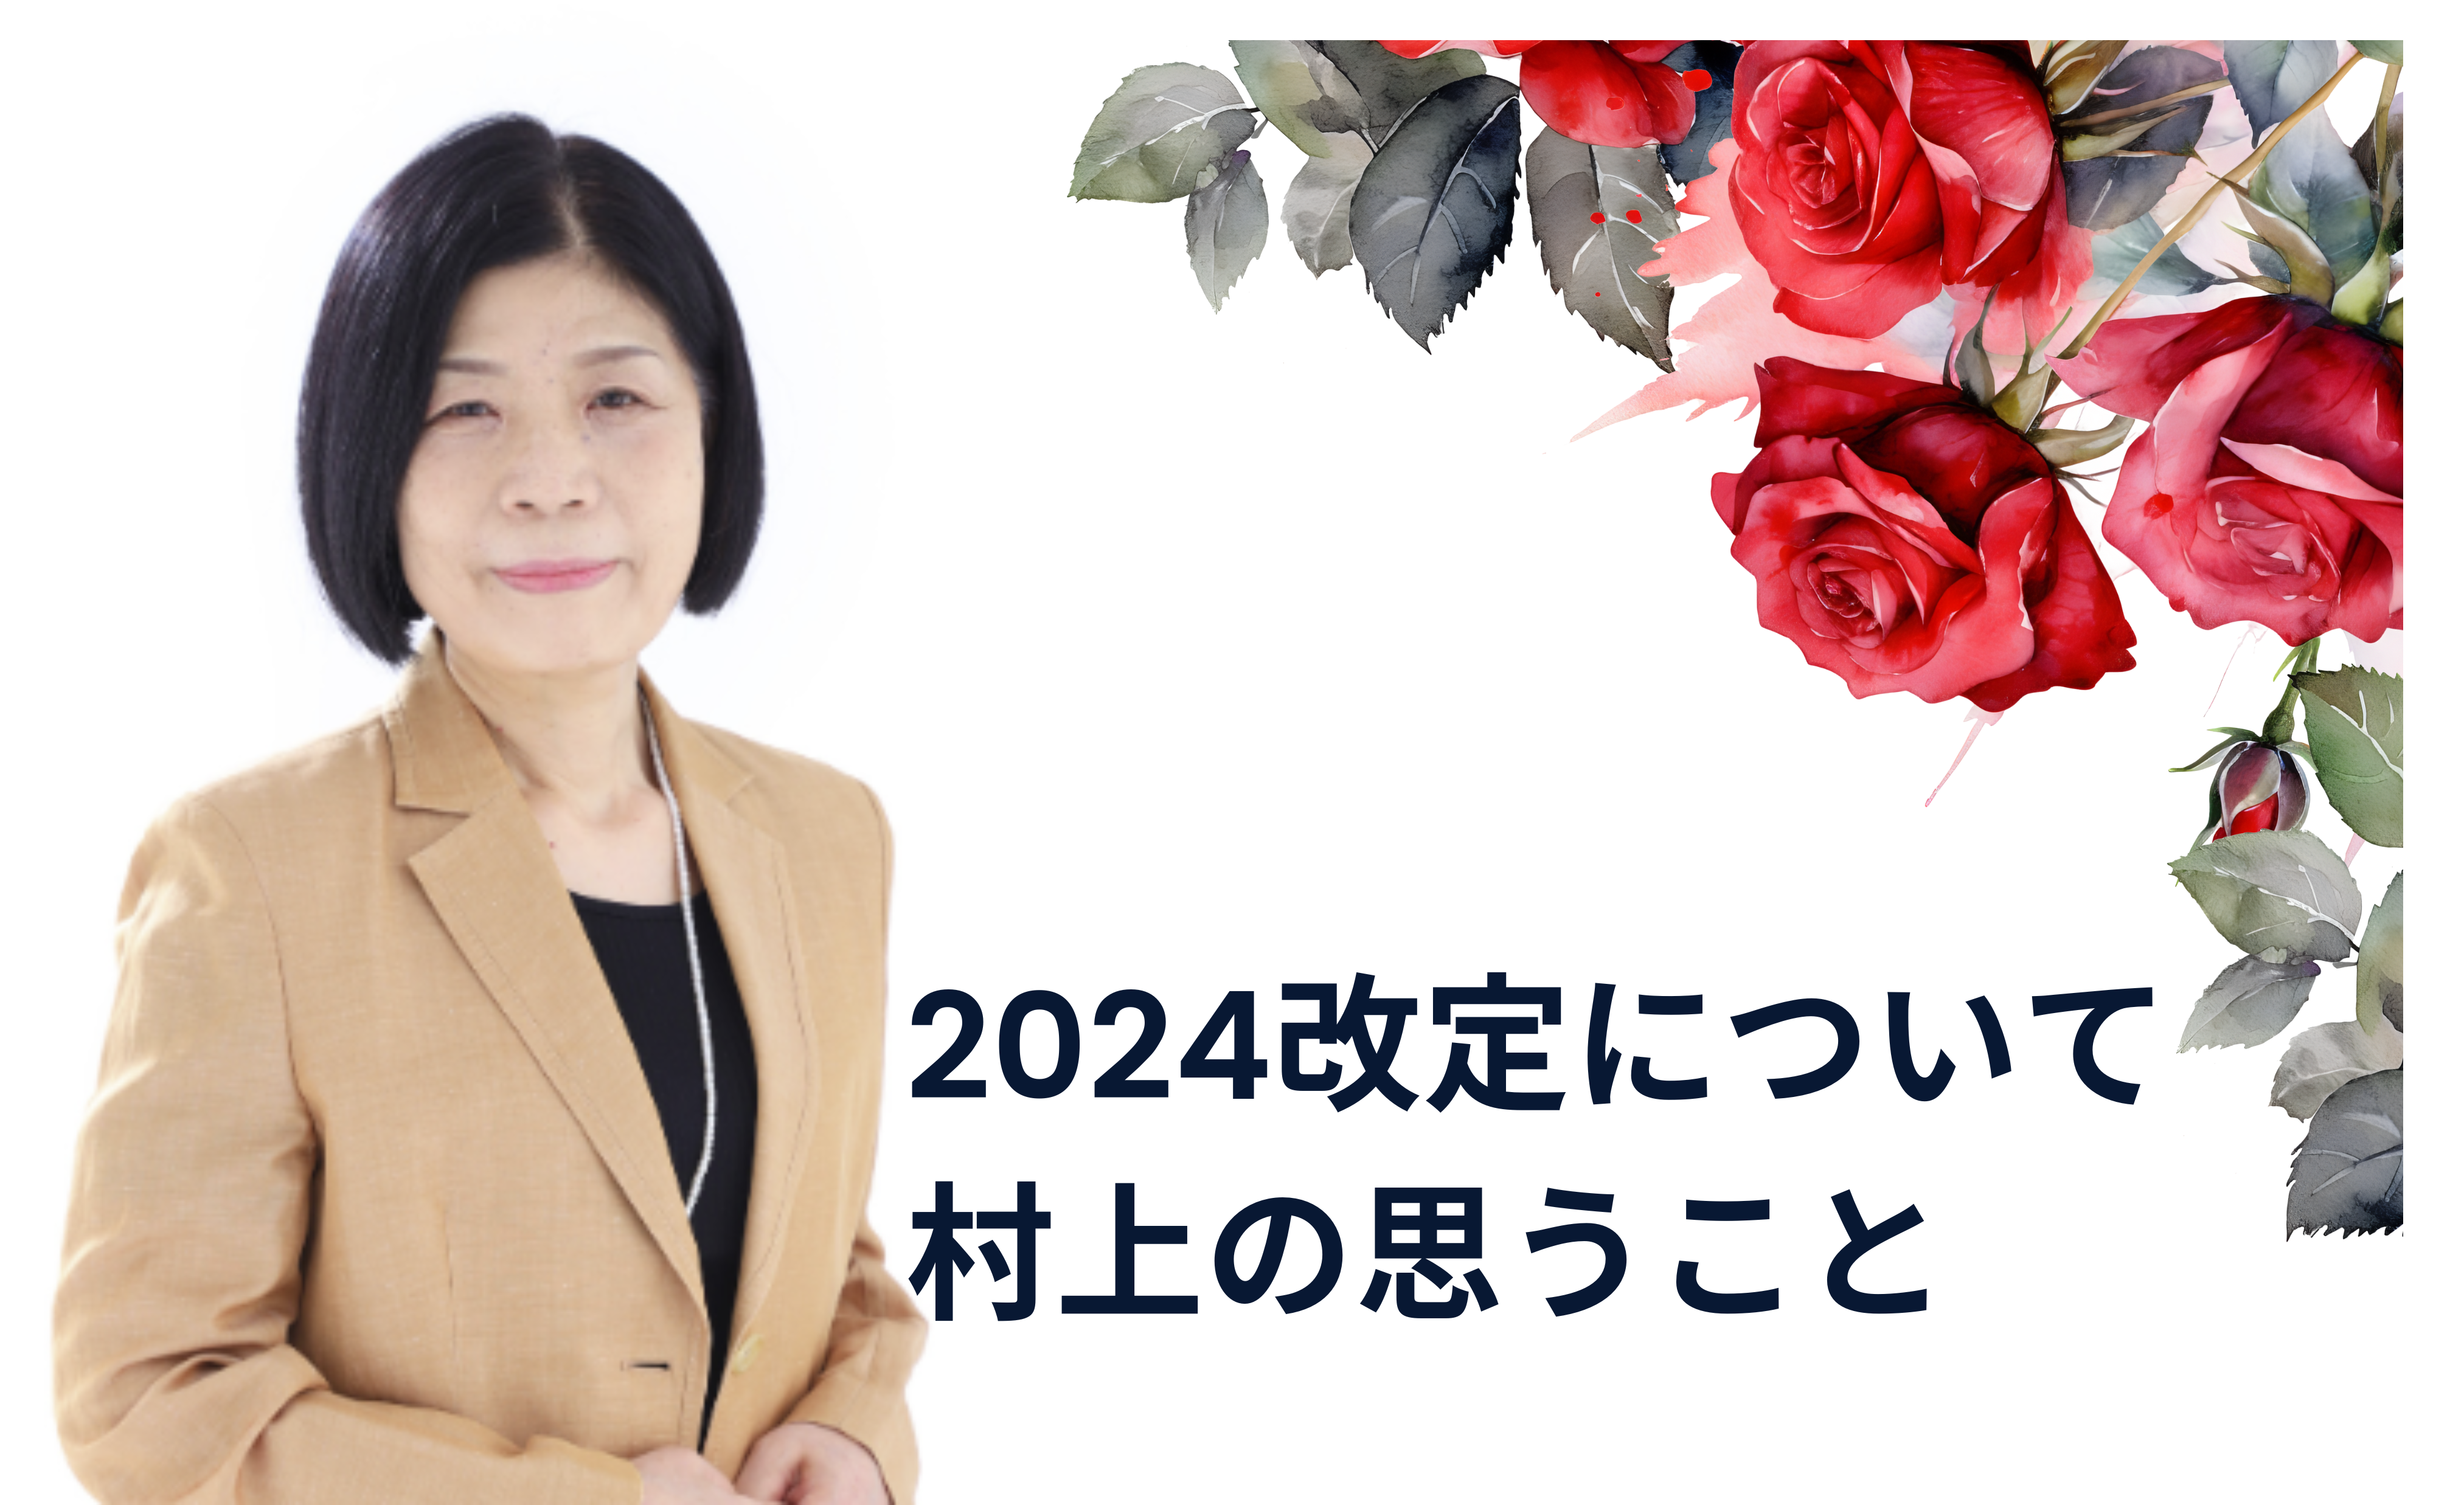 You are currently viewing 2024改定について村上の思うこと